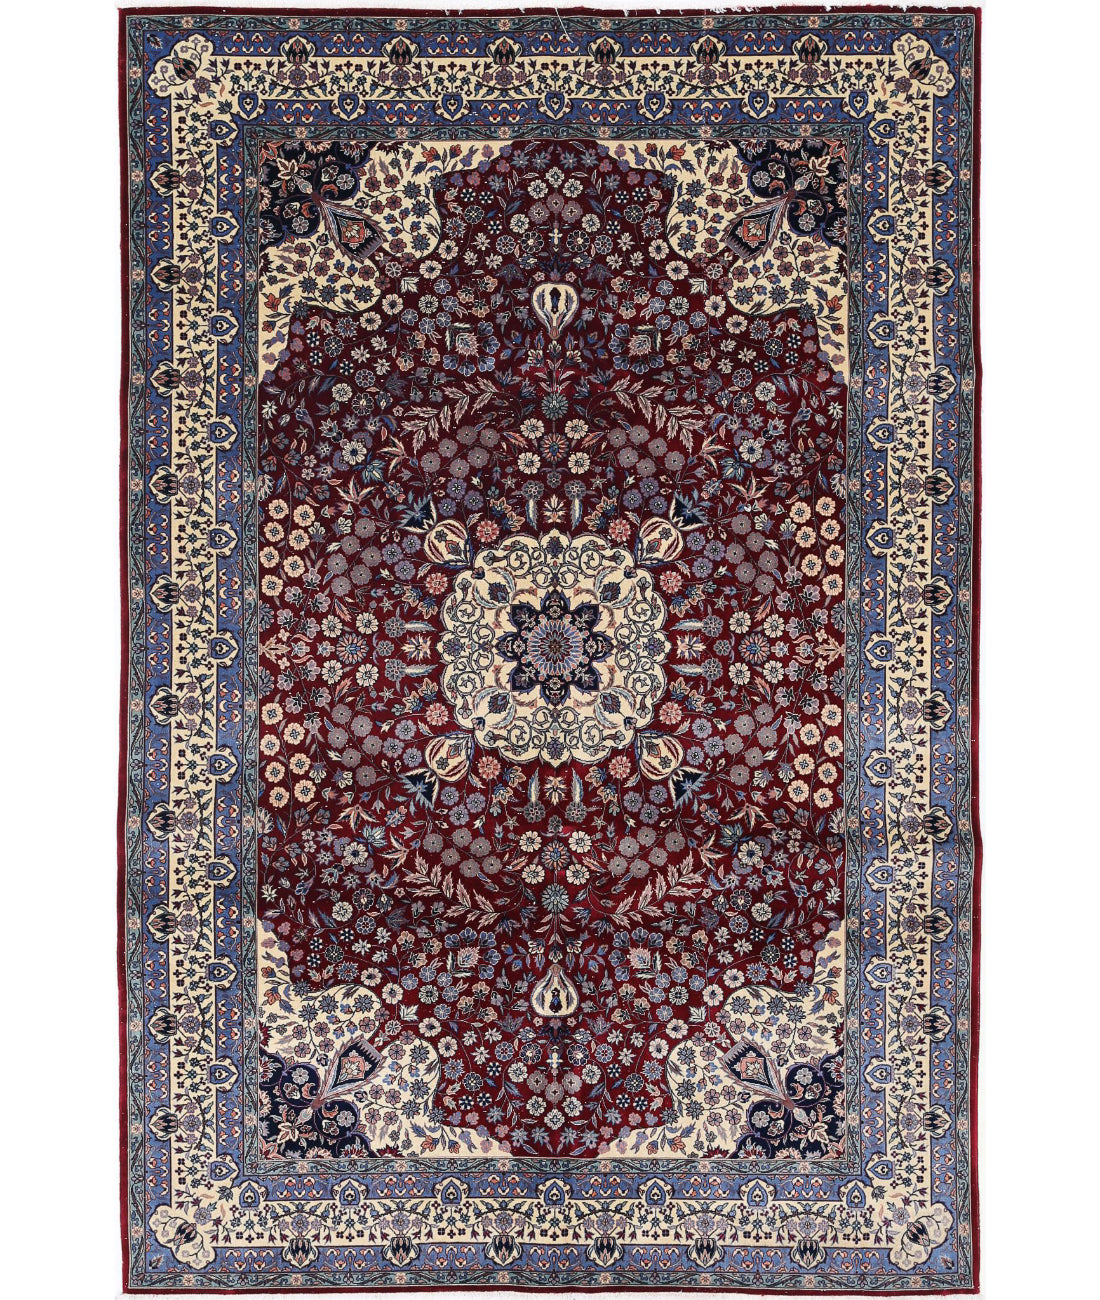 Hand Knotted Heritage Fine Persian Style Wool Rug - 6'0'' x 9'0'' 6'0'' x 9'0'' (180 X 270) / Burgundy / Ivory